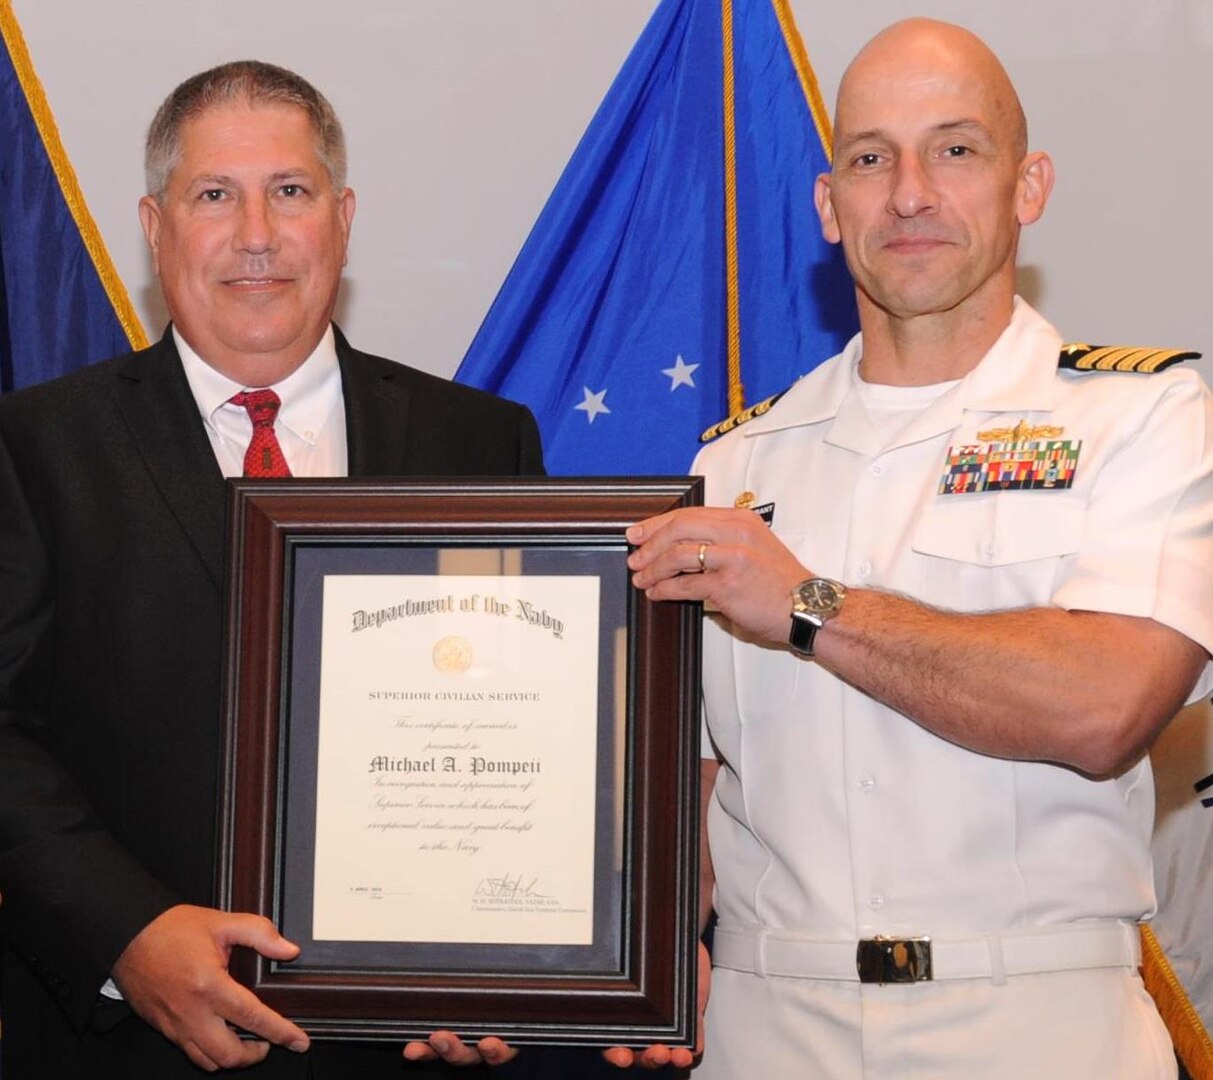 DAHLGREN, Va. - Naval Surface Warfare Center Dahlgren Division (NSWCDD) Commanding Officer Capt. Brian Durant presents Michael Pompeii with the Navy Superior Civilian Service Award at the NSWCDD Annual Honor Awards ceremony on May 18, 2016. Pompeii was honored for his numerous substantial contributions to Naval Sea Systems Command as Chief Engineer for the NSWCDD Chemical, Biological, and Radiological (CBR) Defense Division. "Mr. Pompeii has provided leadership to CBR Defense equipment designs, influenced CBR Defense policy and shipboard procedures, and increased the Navy's CBR Defense scientific, engineering, and test capabilities," according to the citation. "He has challenged the status quo to define more realistic threats and has spearheaded several cost reduction initiatives that simultaneously achieved multi-million dollar savings for the Navy and increased fleet CBR Defense readiness."